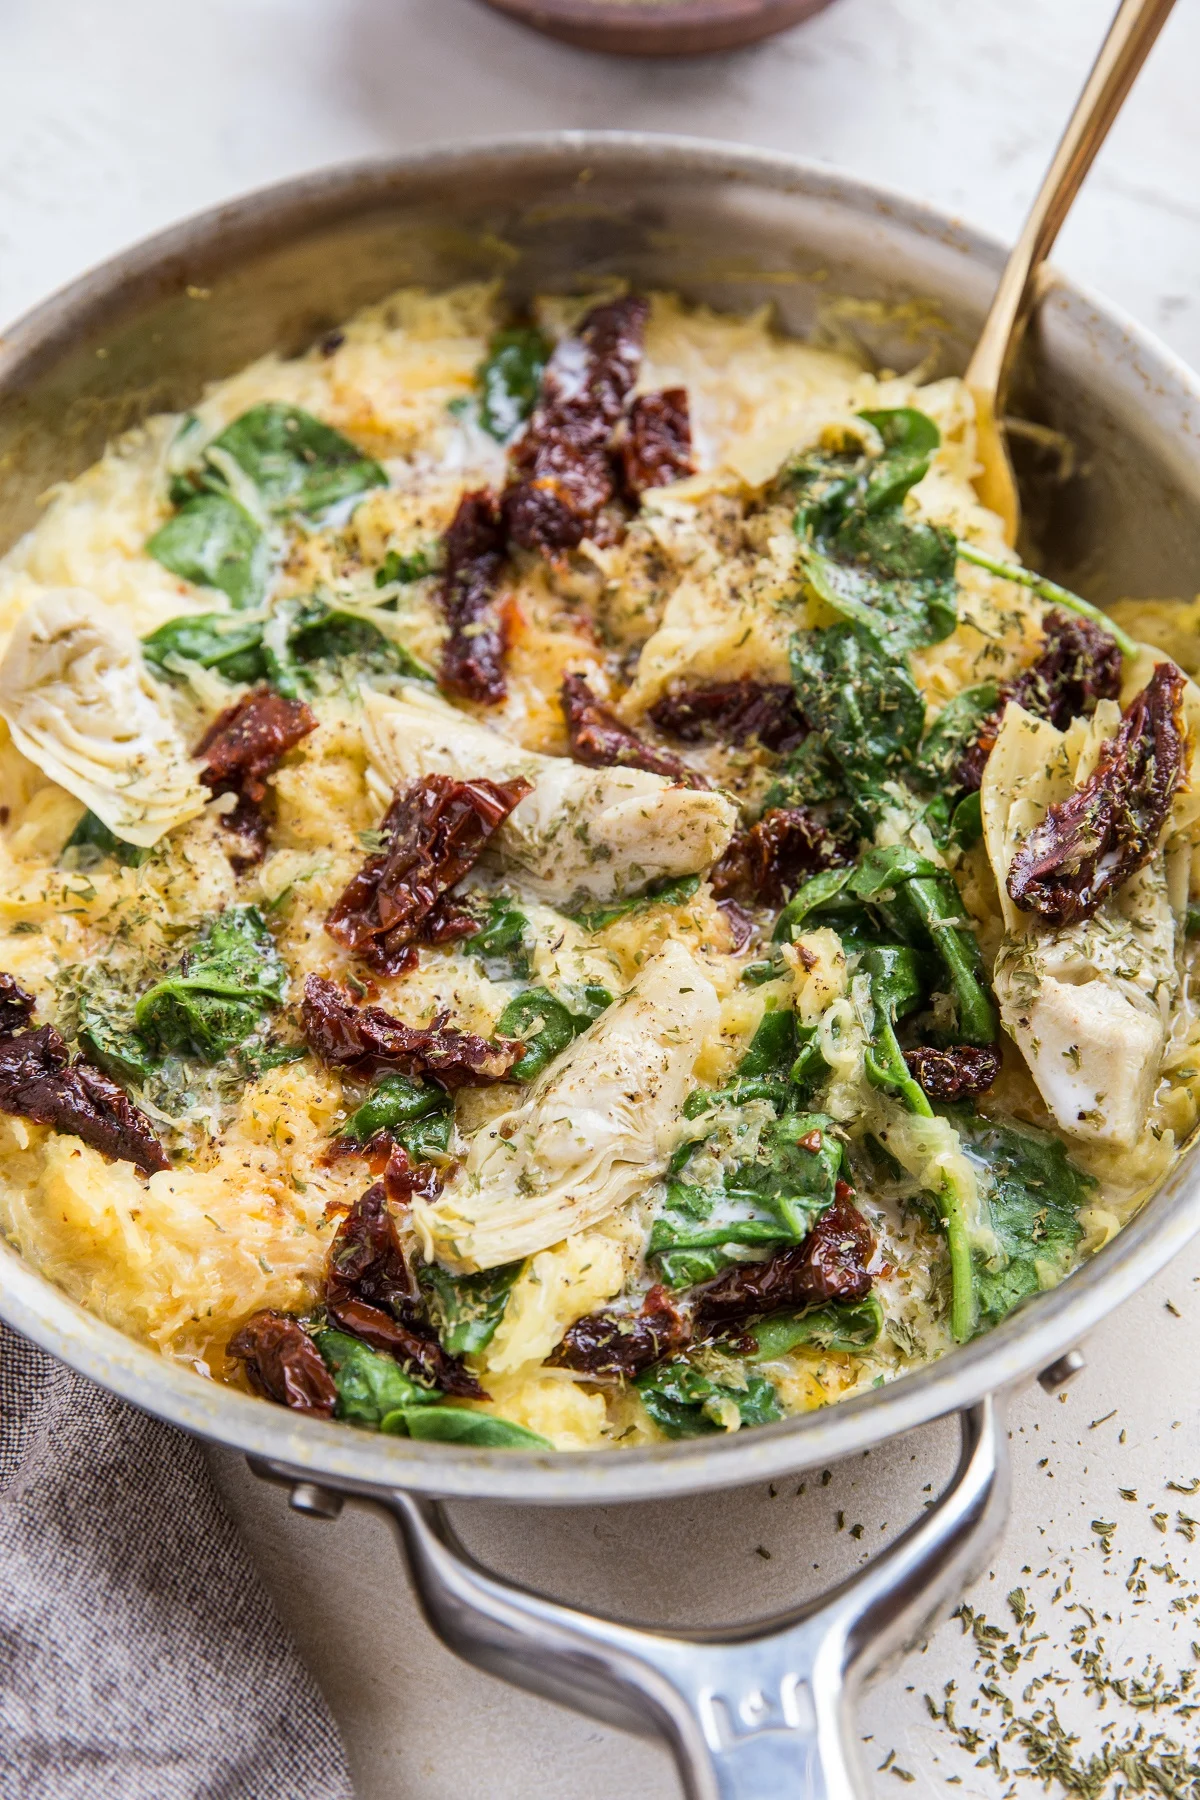 Paleo Tuscan Spaghetti Squash with sun-dried tomatoes, artichoke hearts and spinach - a creamy dairy-free spaghetti squash recipe that is vegan, low-carb and keto - make it as a side dish or main entree